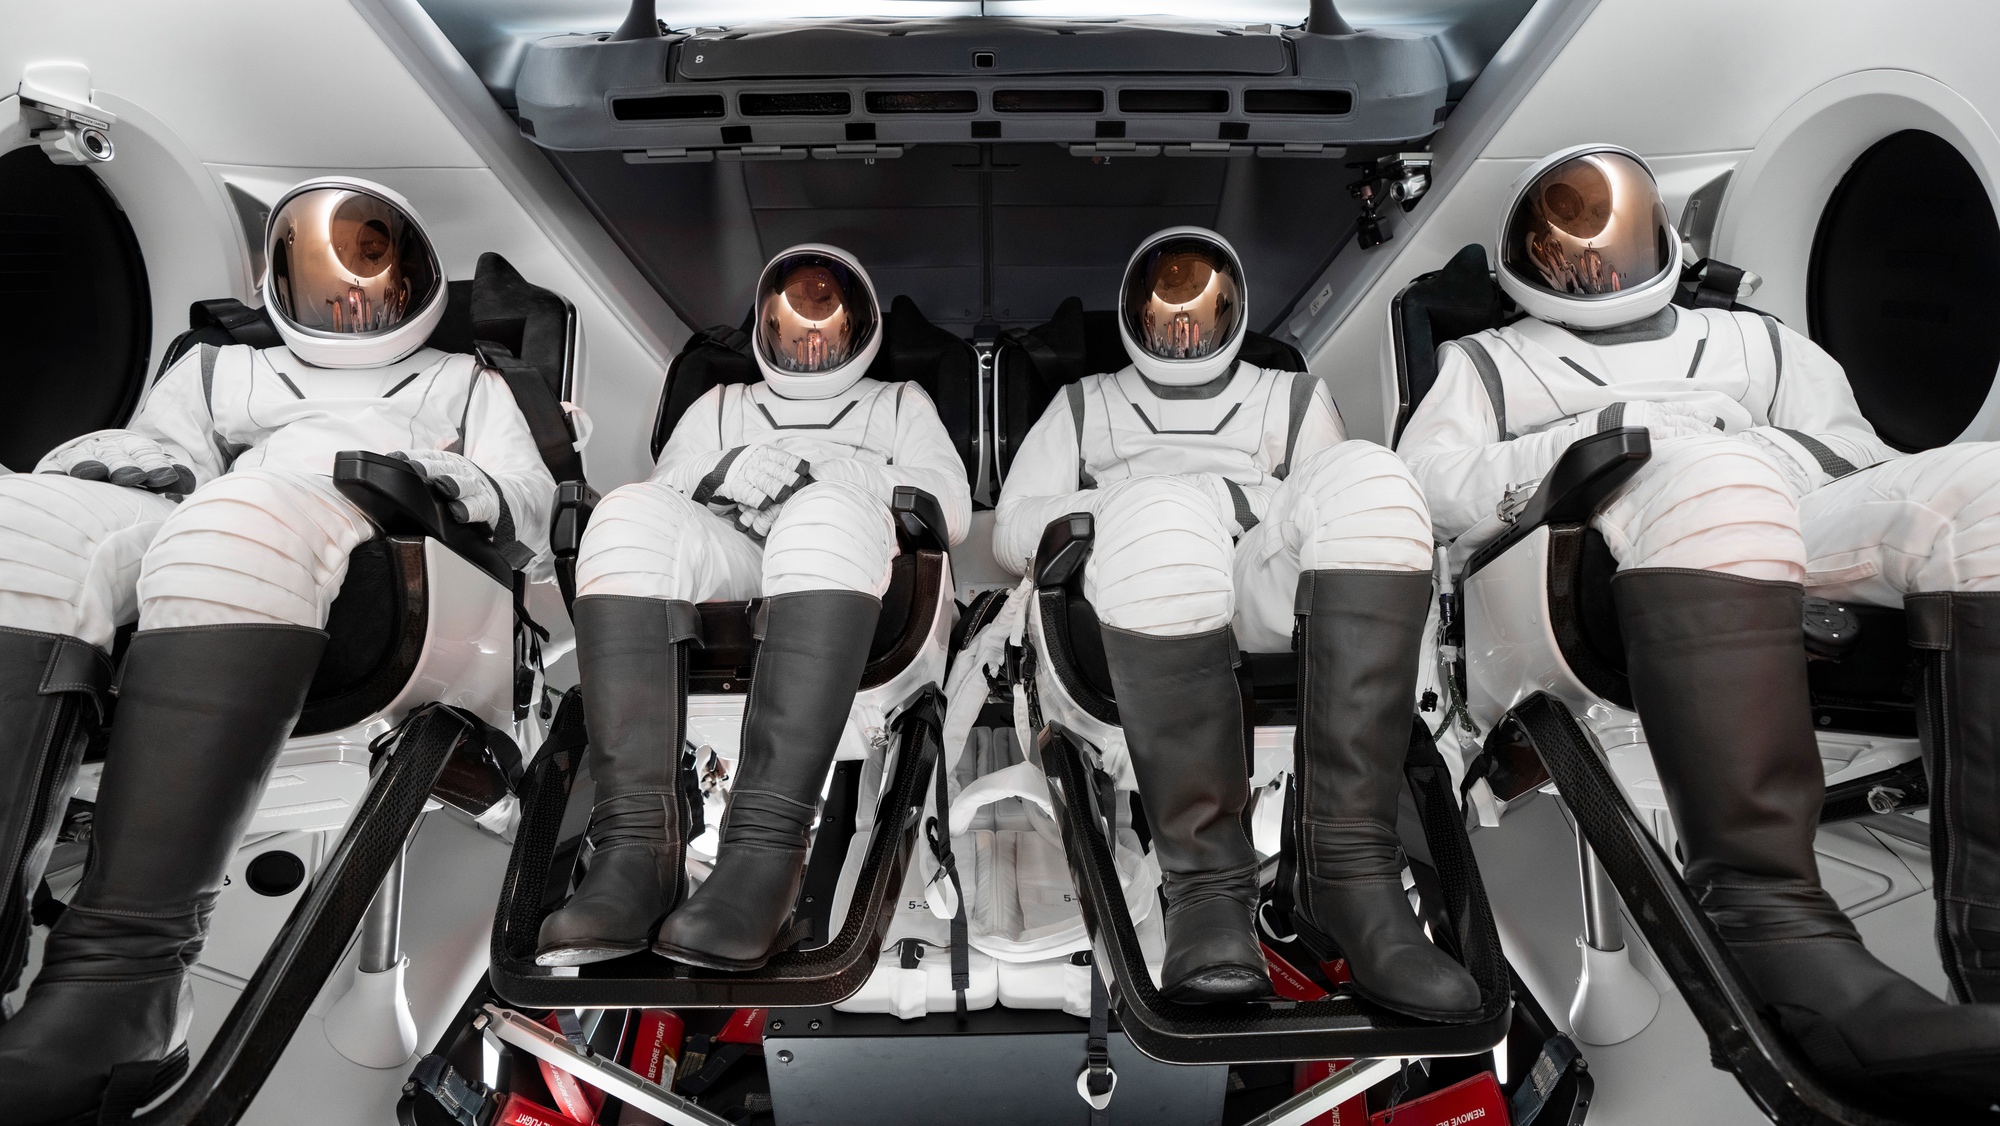 ORLANDO, Fla. — SpaceX has unveiled long-awaited spacesuits intended for spacewalks that will first be used on an upcoming private spaceflight. The 